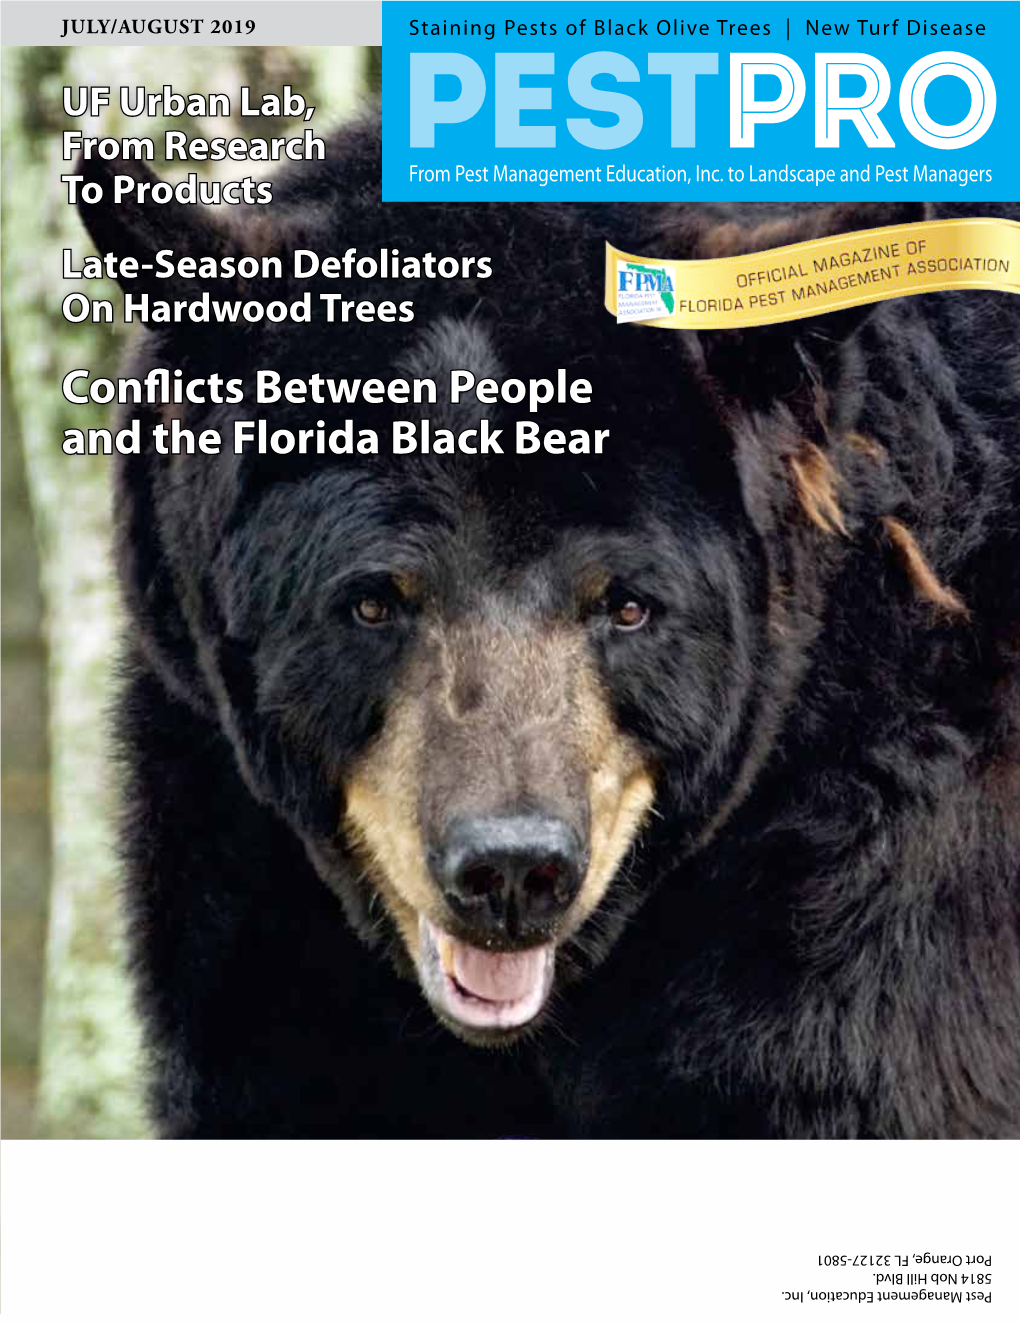 Conflicts Between People and the Florida Black Bear